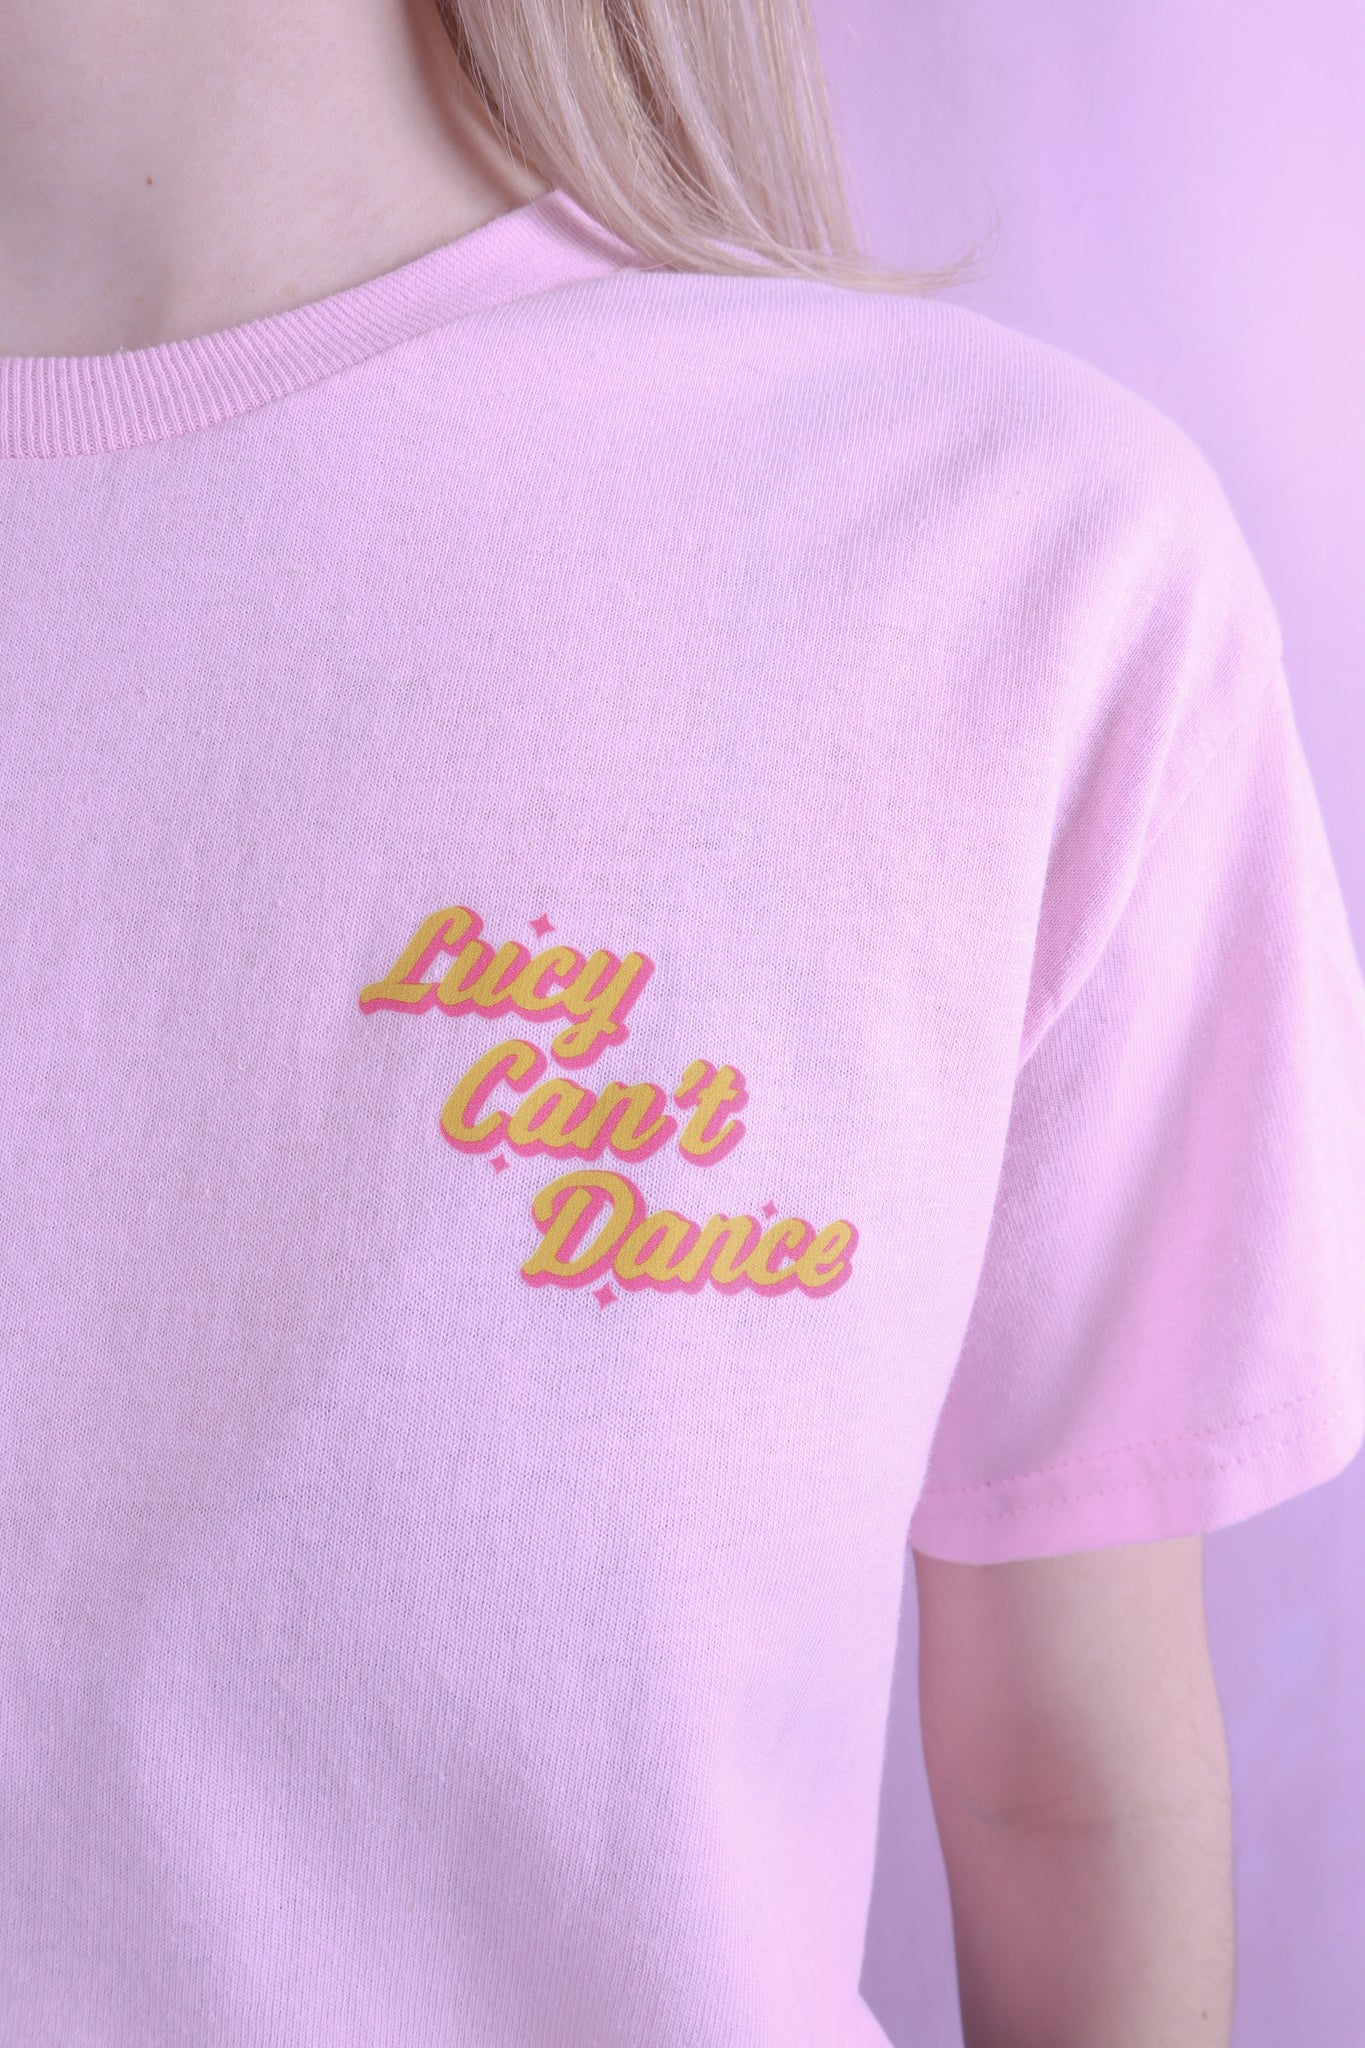 Lucy Can't Dance T shirt - Pink